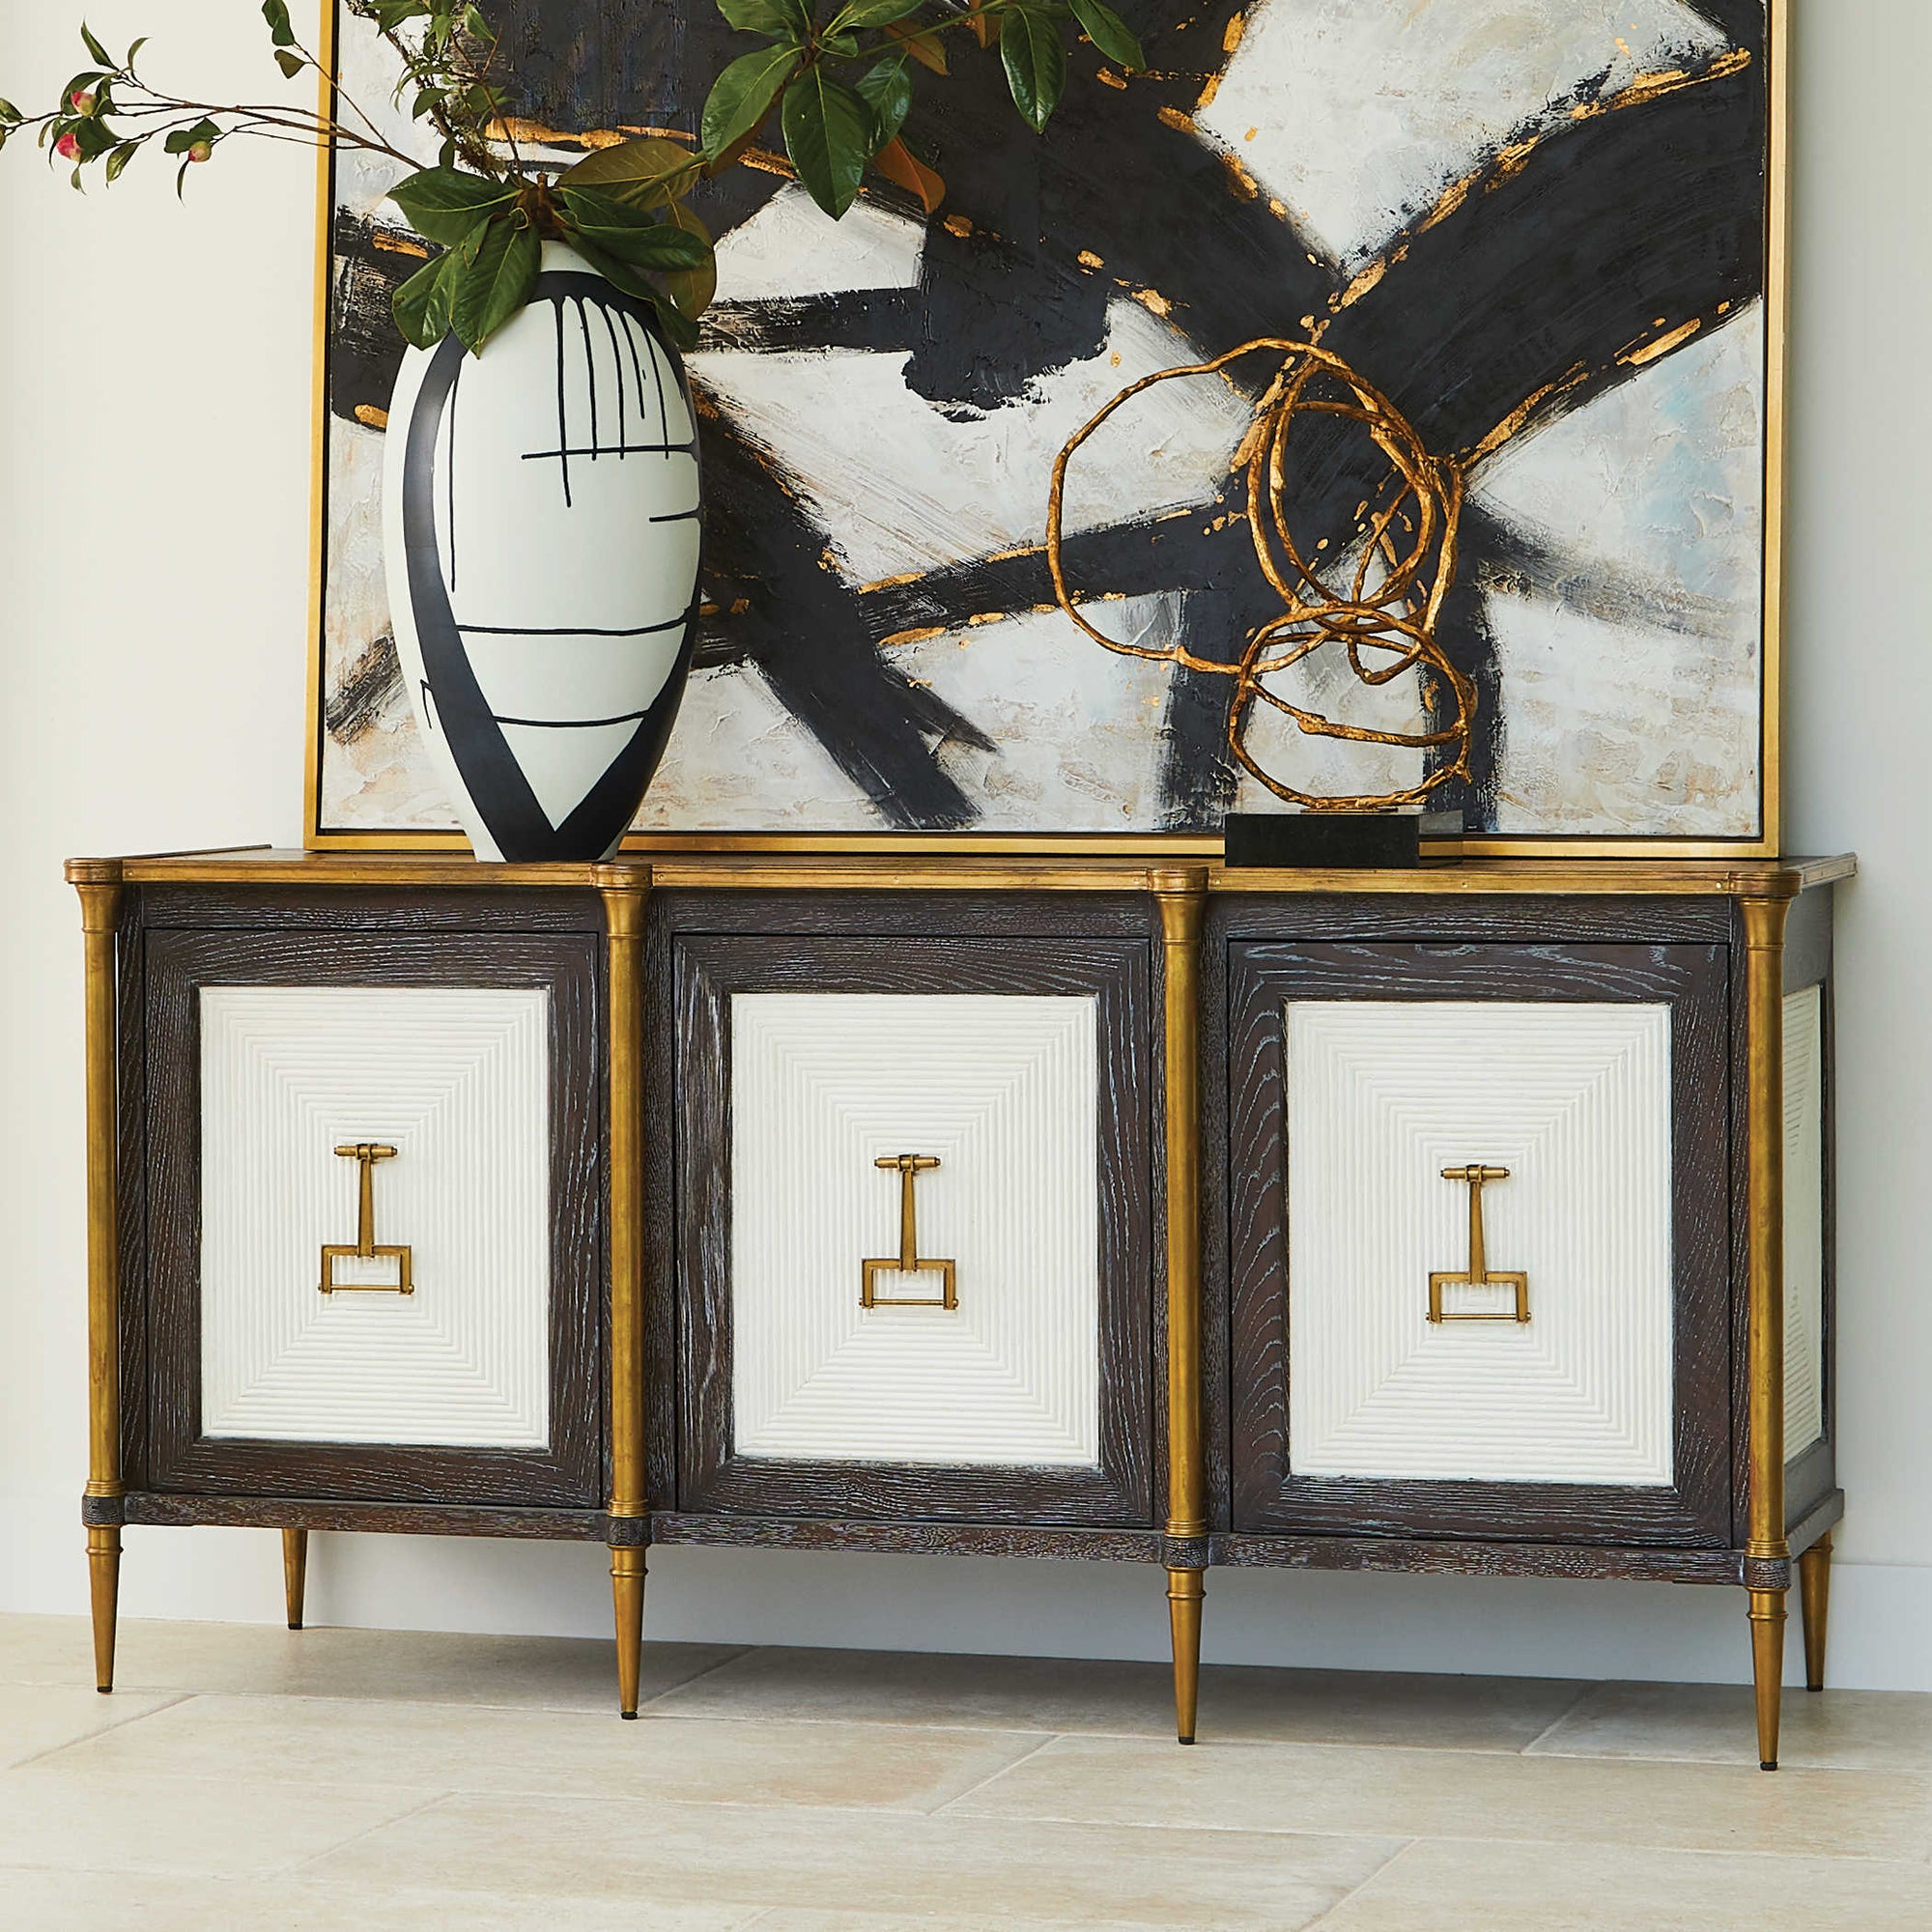 Beautifully detailed cabinet, with a gold finish and classical elements. A modern sculpture and a black and blue bottle on it. And an abstract artwork giving a modern look to the scene.